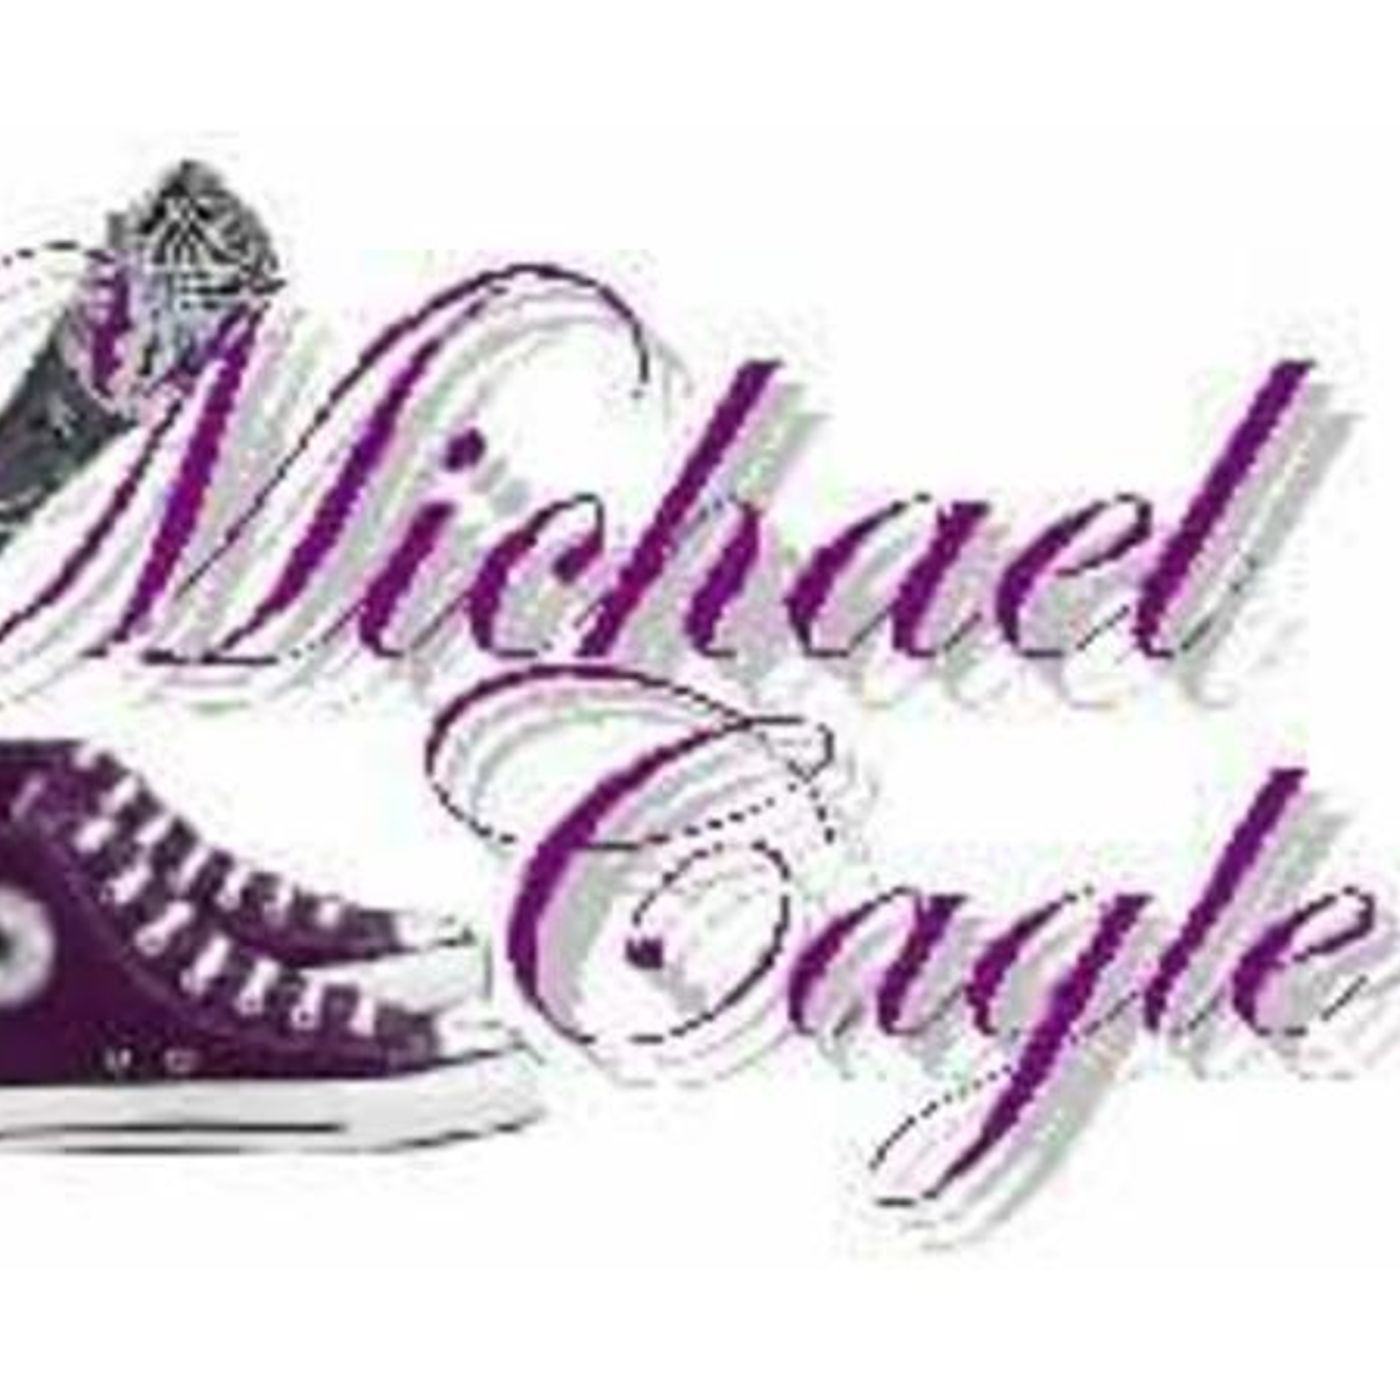 TAKING CENTER STAGE With Michael Cagle